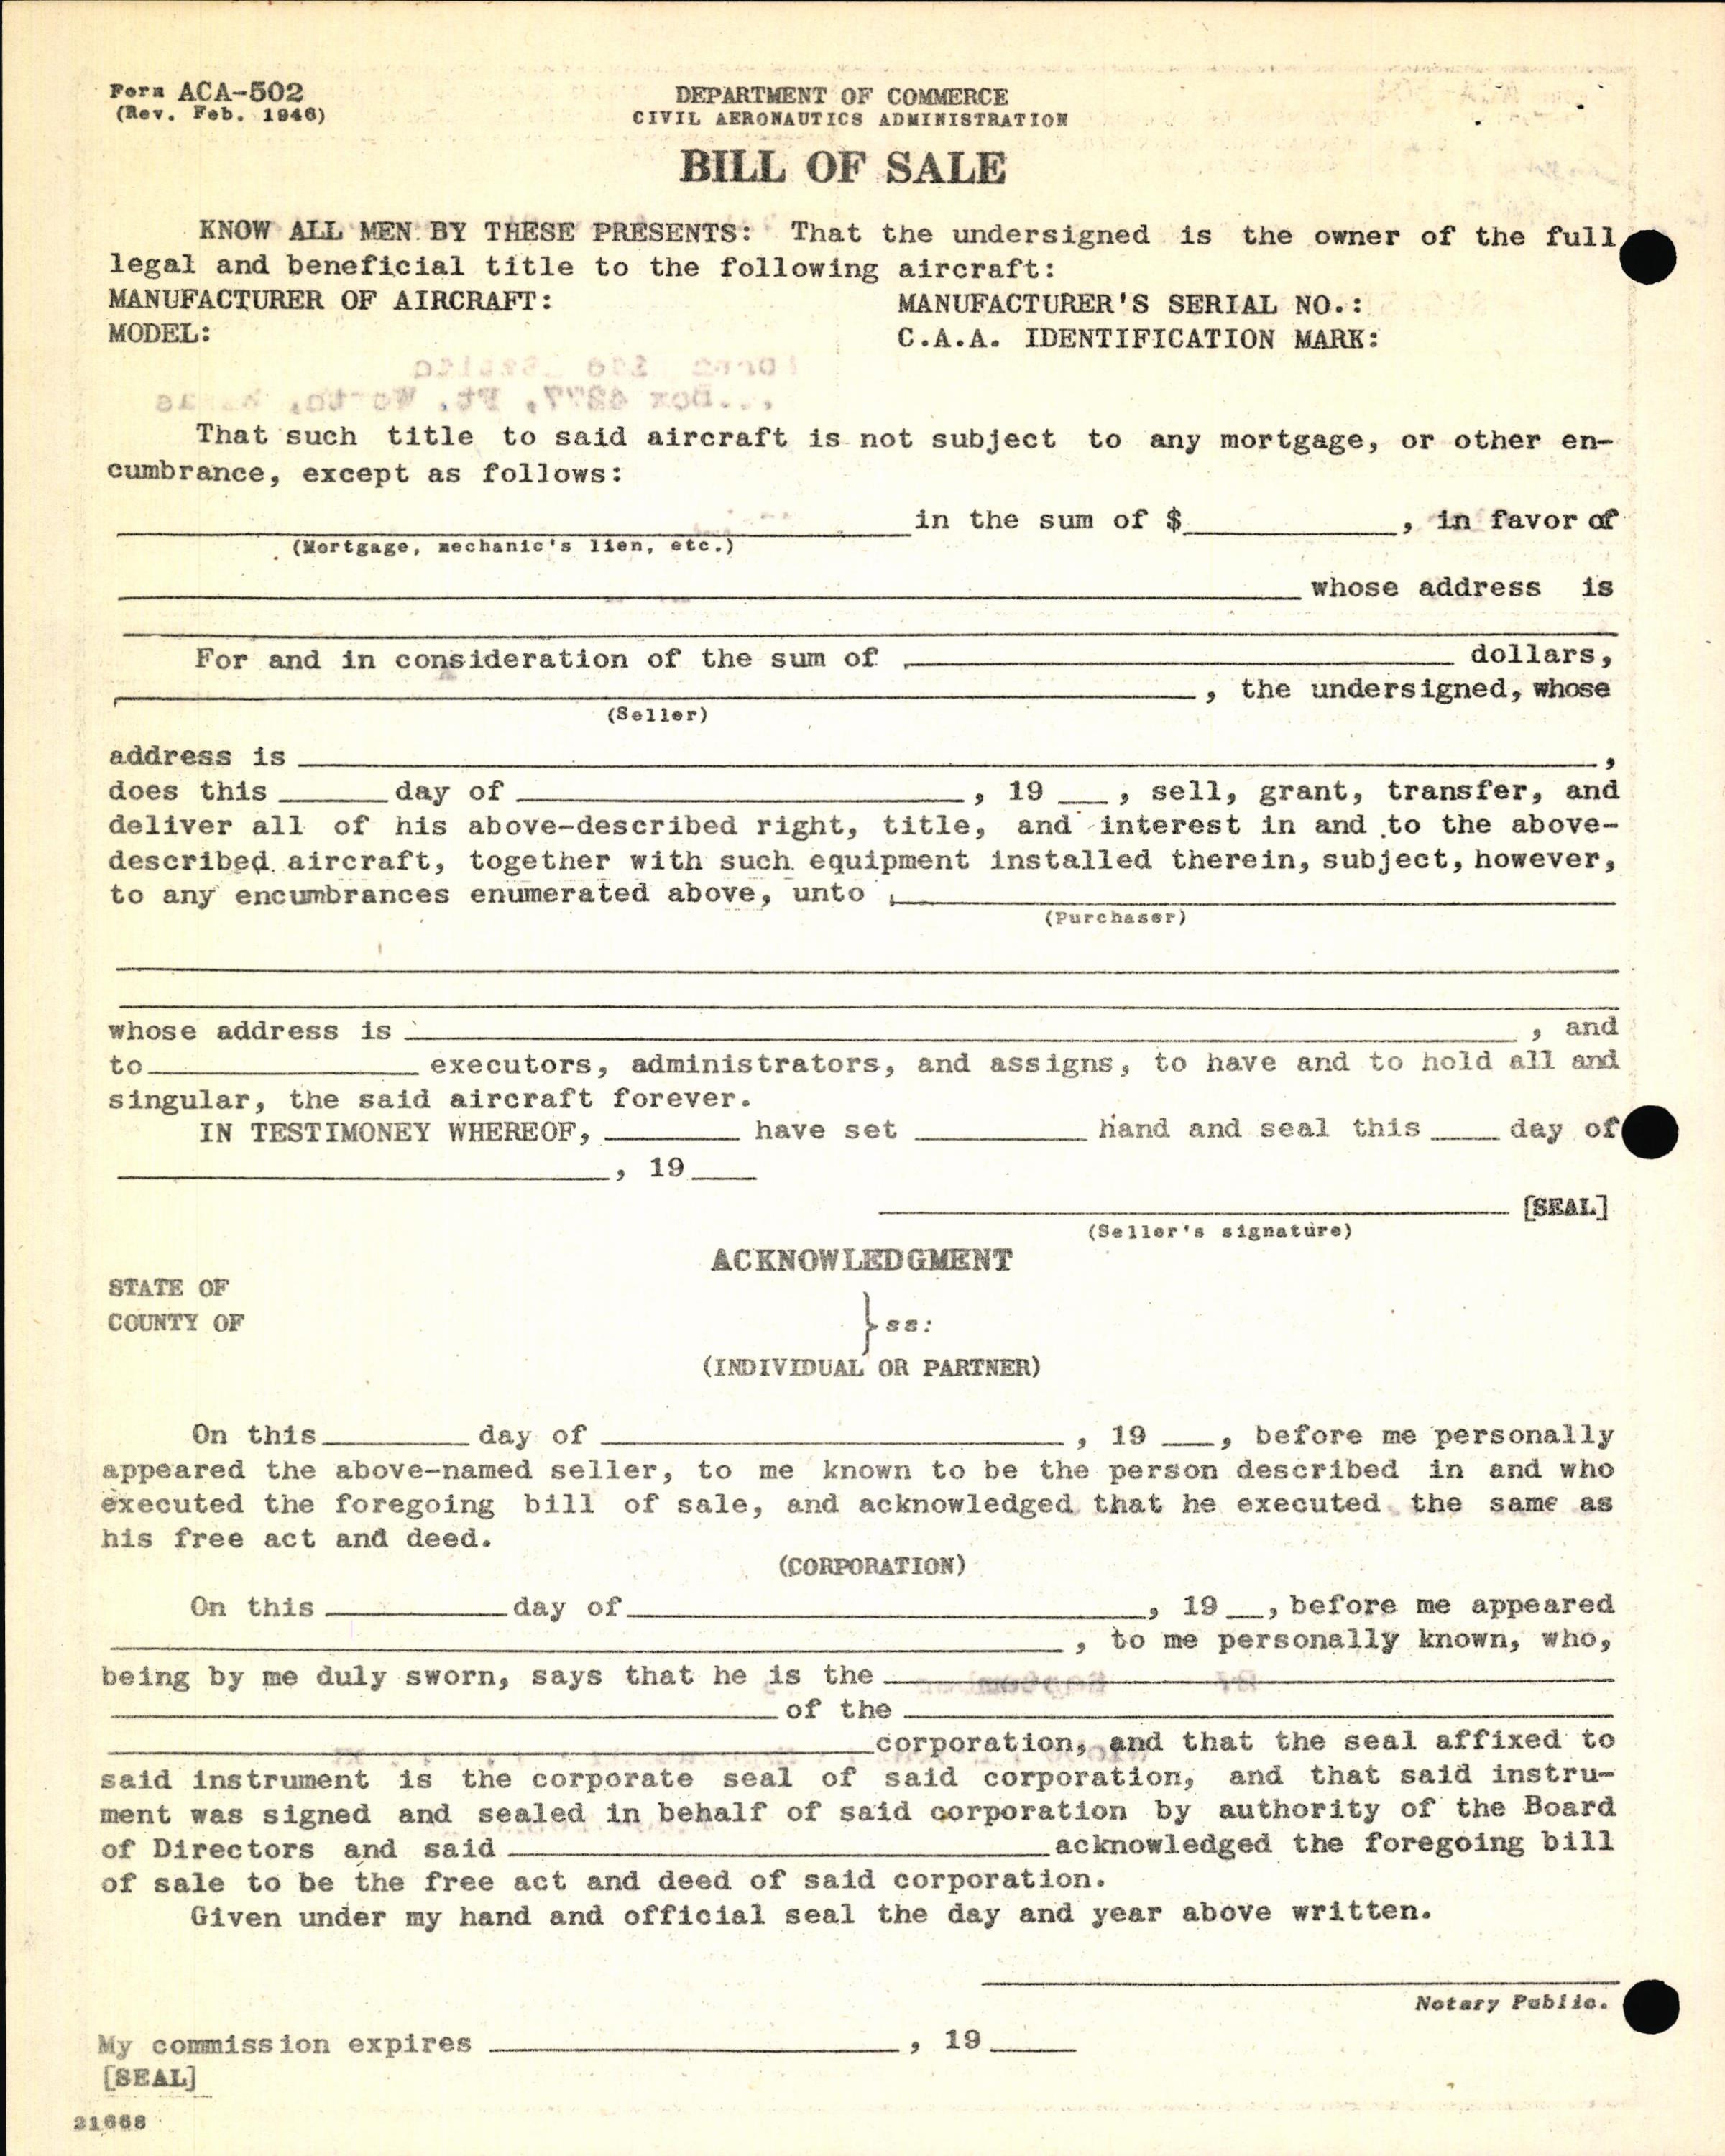 Sample page 6 from AirCorps Library document: Technical Information for Serial Number 1210